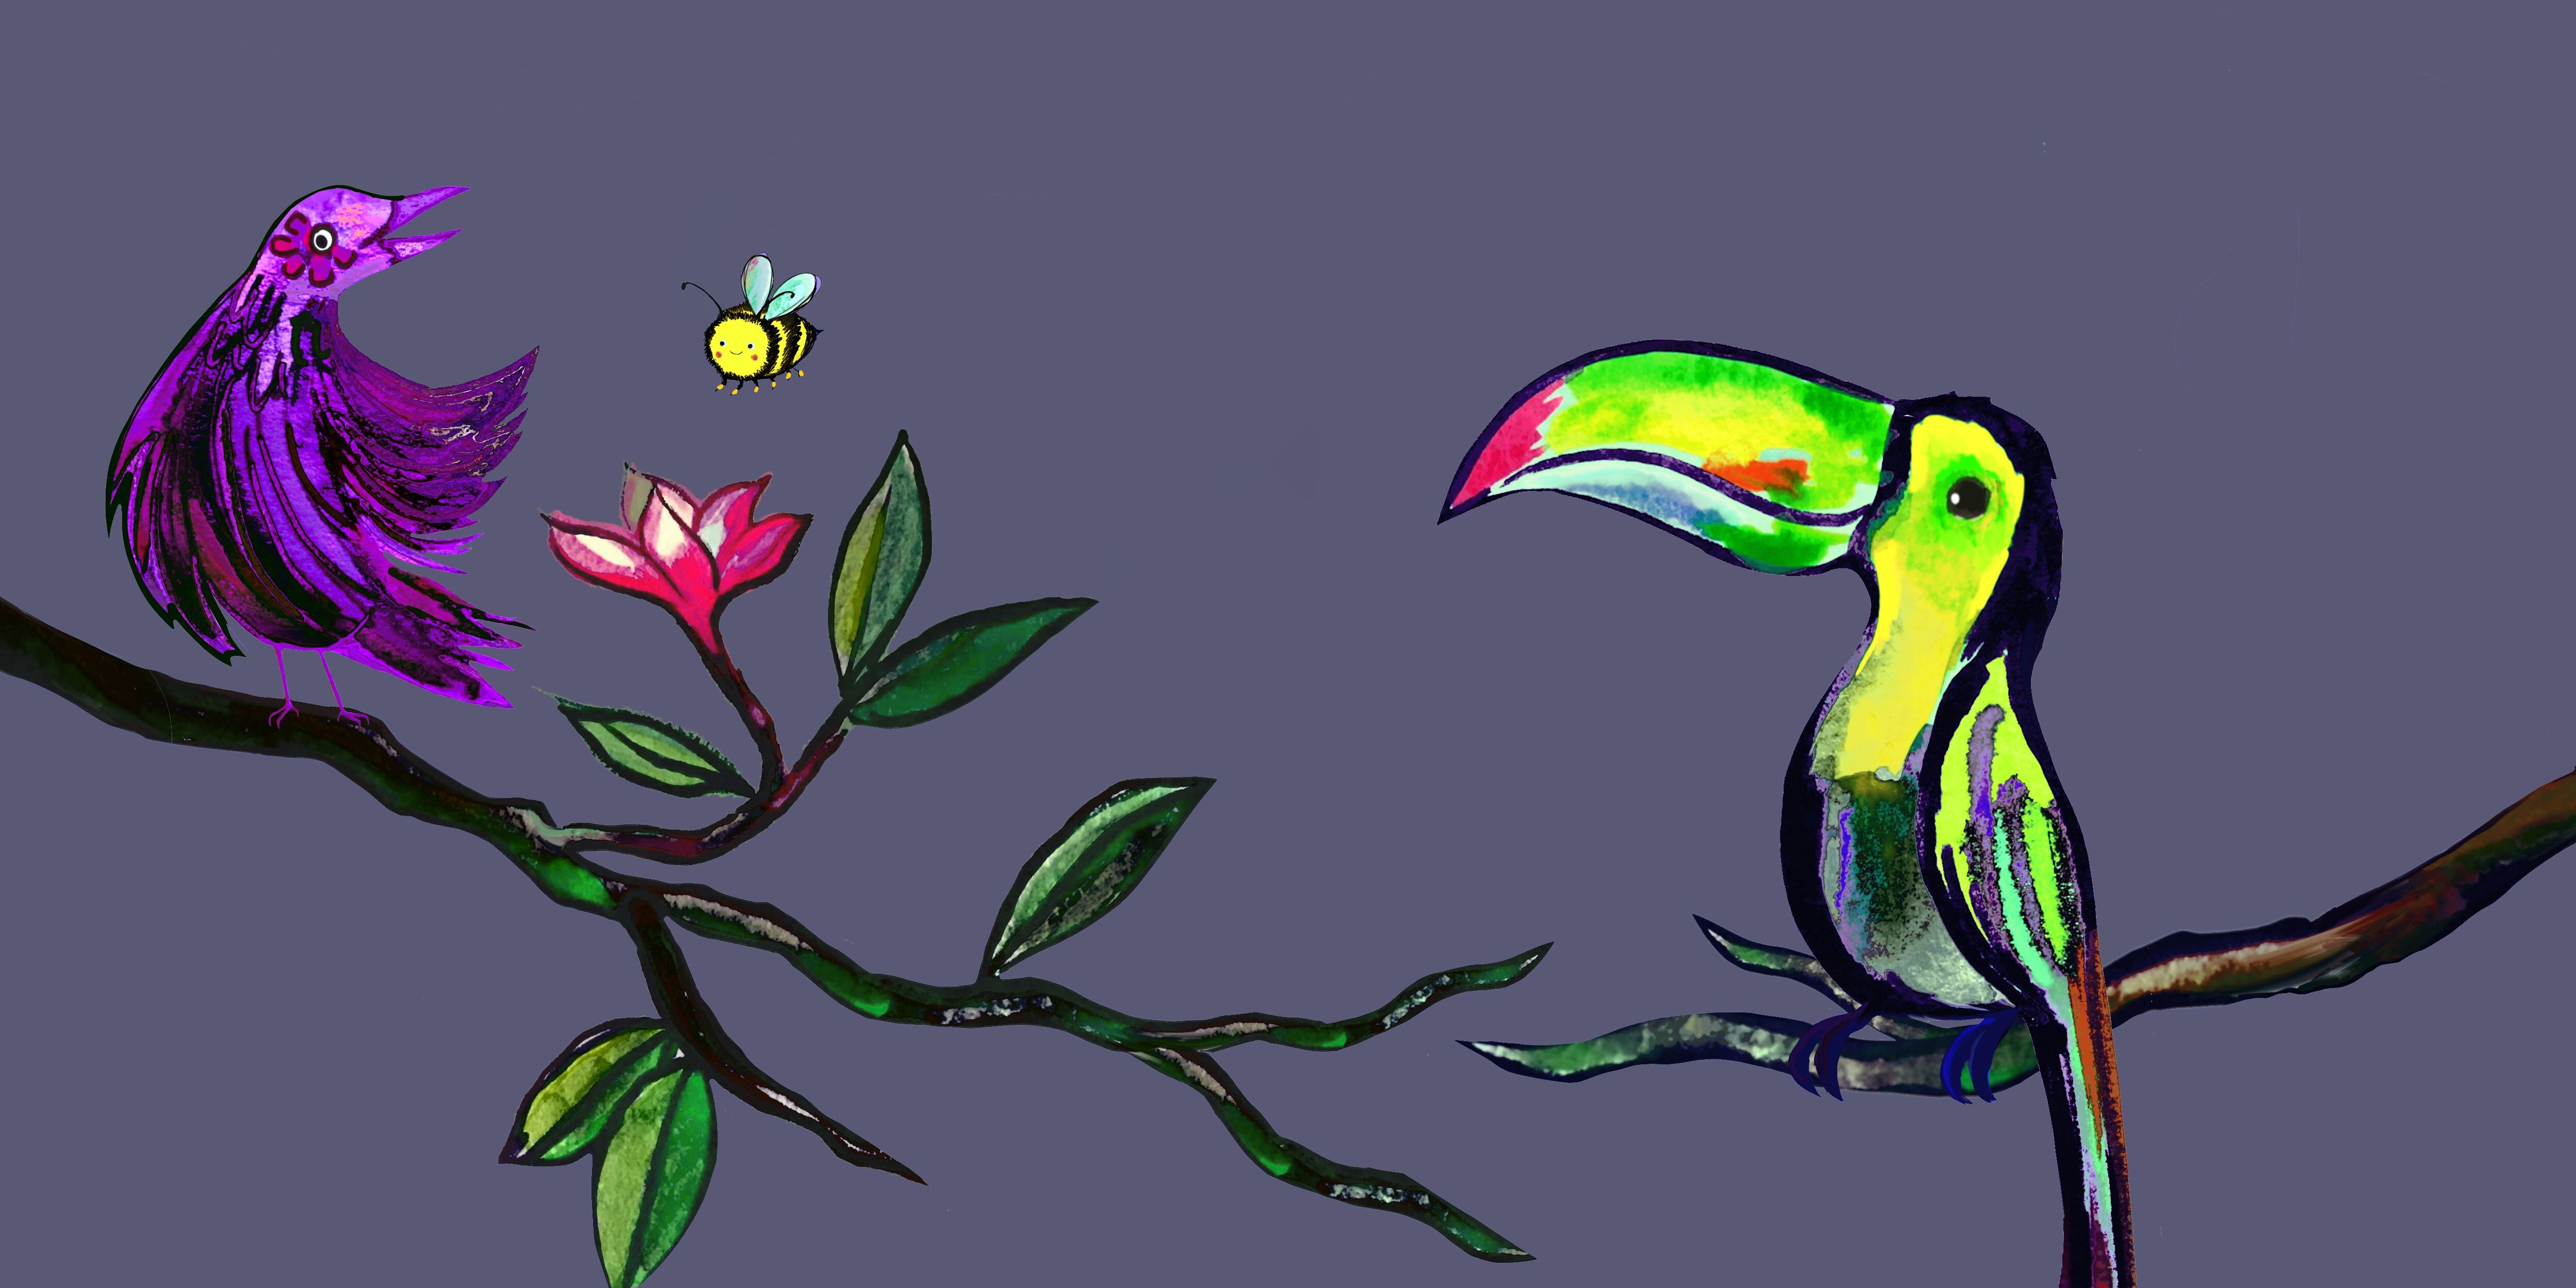 drawing of two brightly colored birds on a branch, with a bee near flower